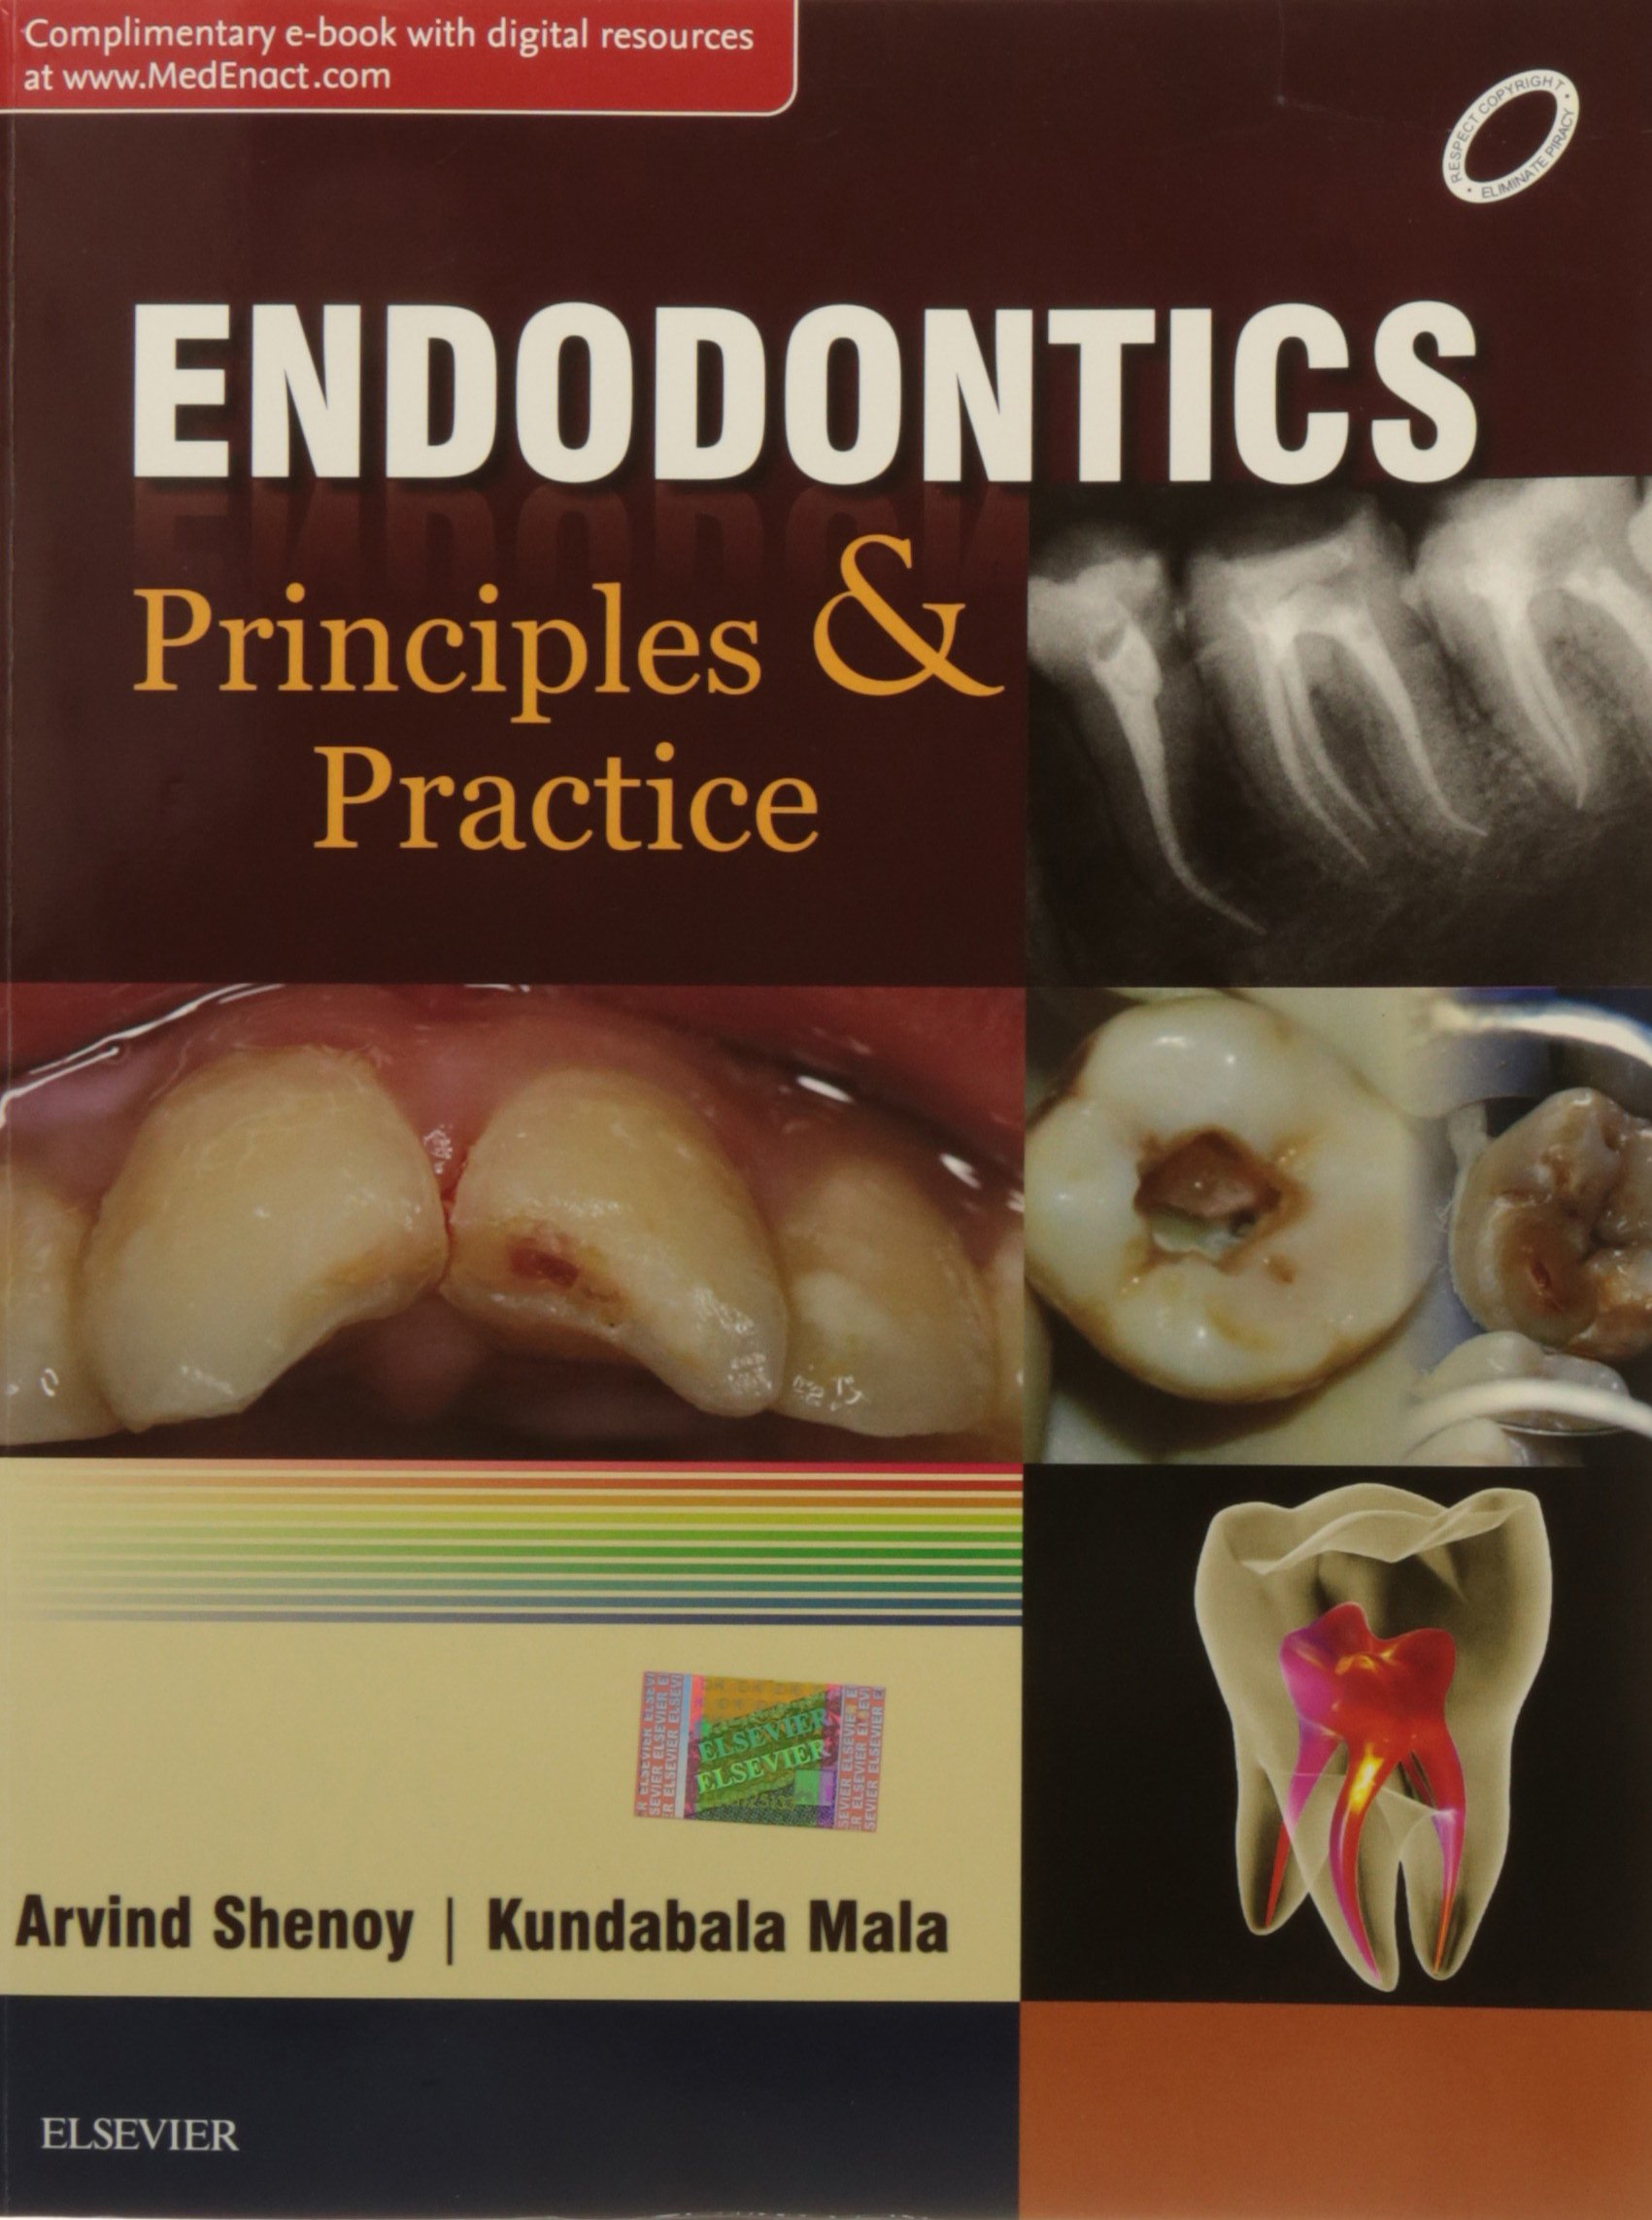 Endodontics: Principles And Practice (Complimentary E-Book With Digital Resources)